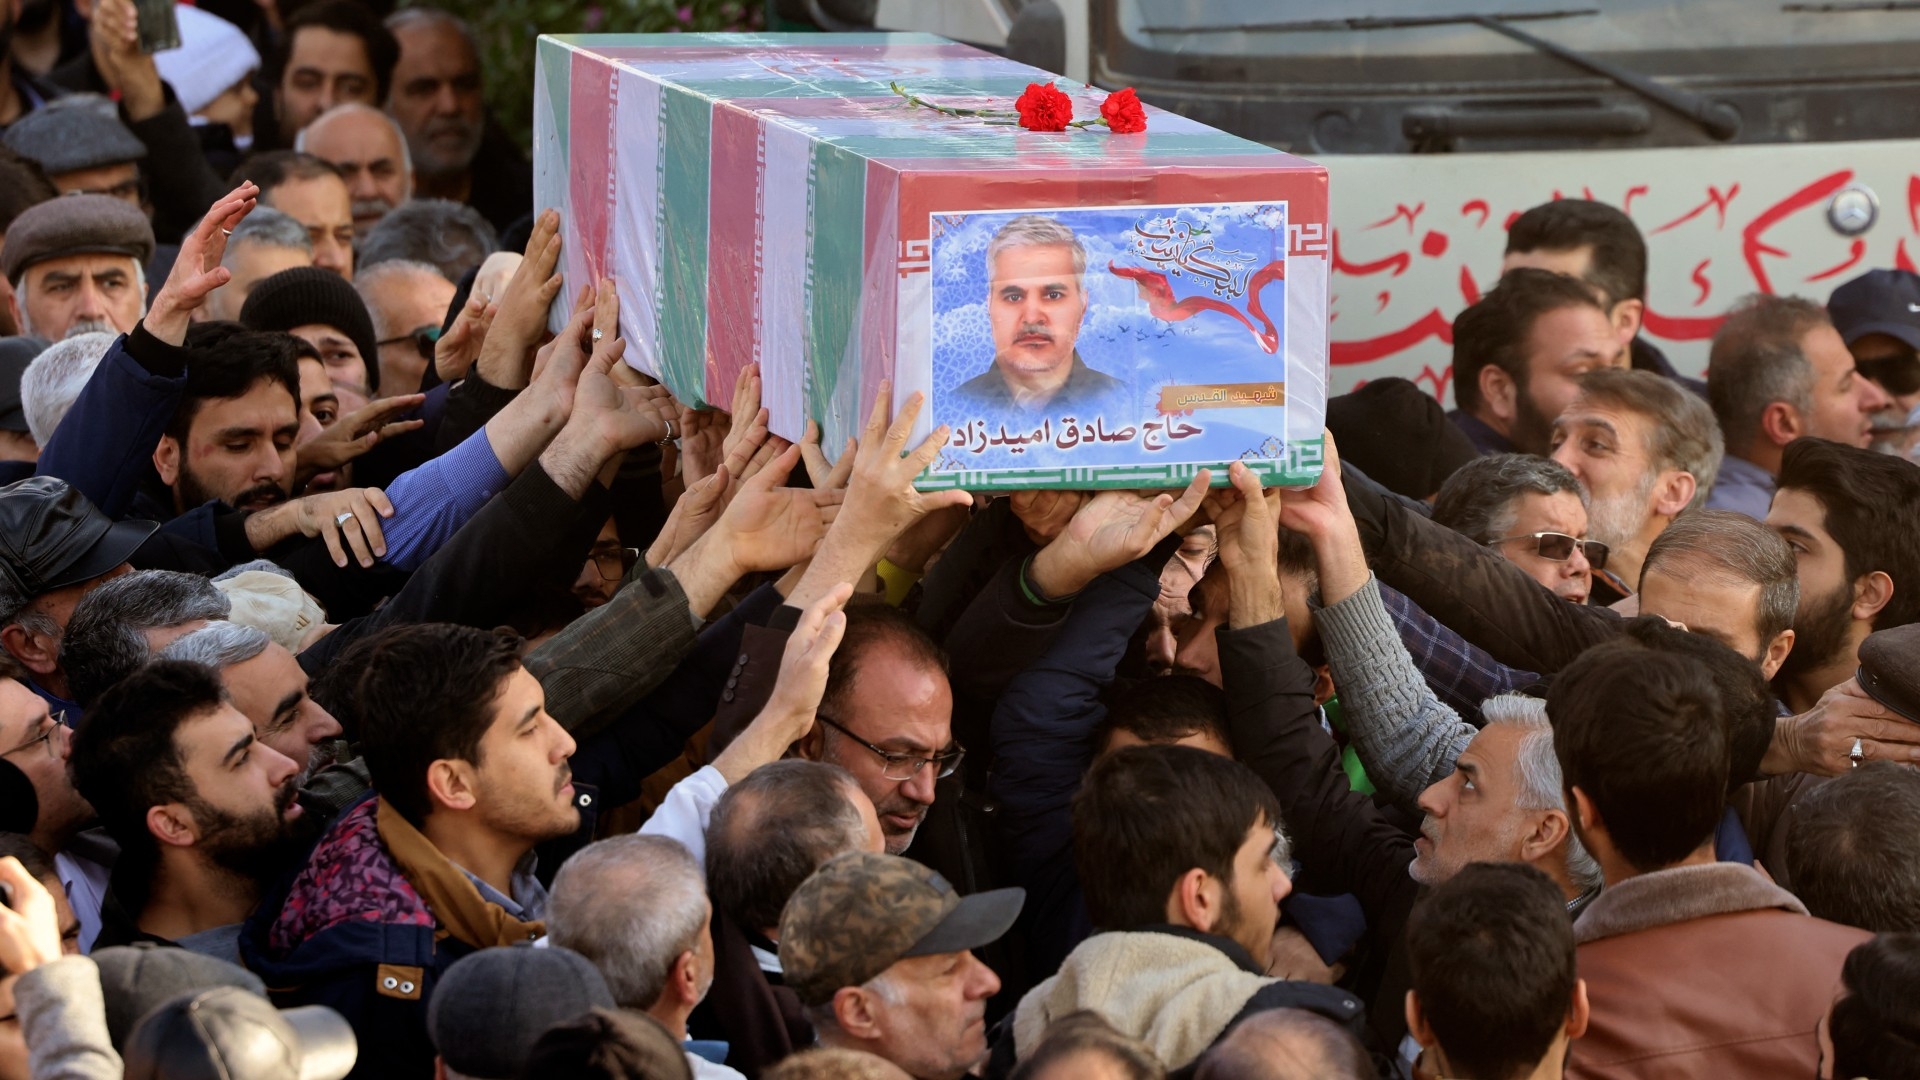 Mourners carry the casket of Islamic Revolutionary Guard Corps (IRGC) member, General Sadegh Omizadeh, killed in Damascus in a strike blamed on Israel on 20 January, during his funeral in Tehran on 22 January 2023 (Atta Kena/AFP)